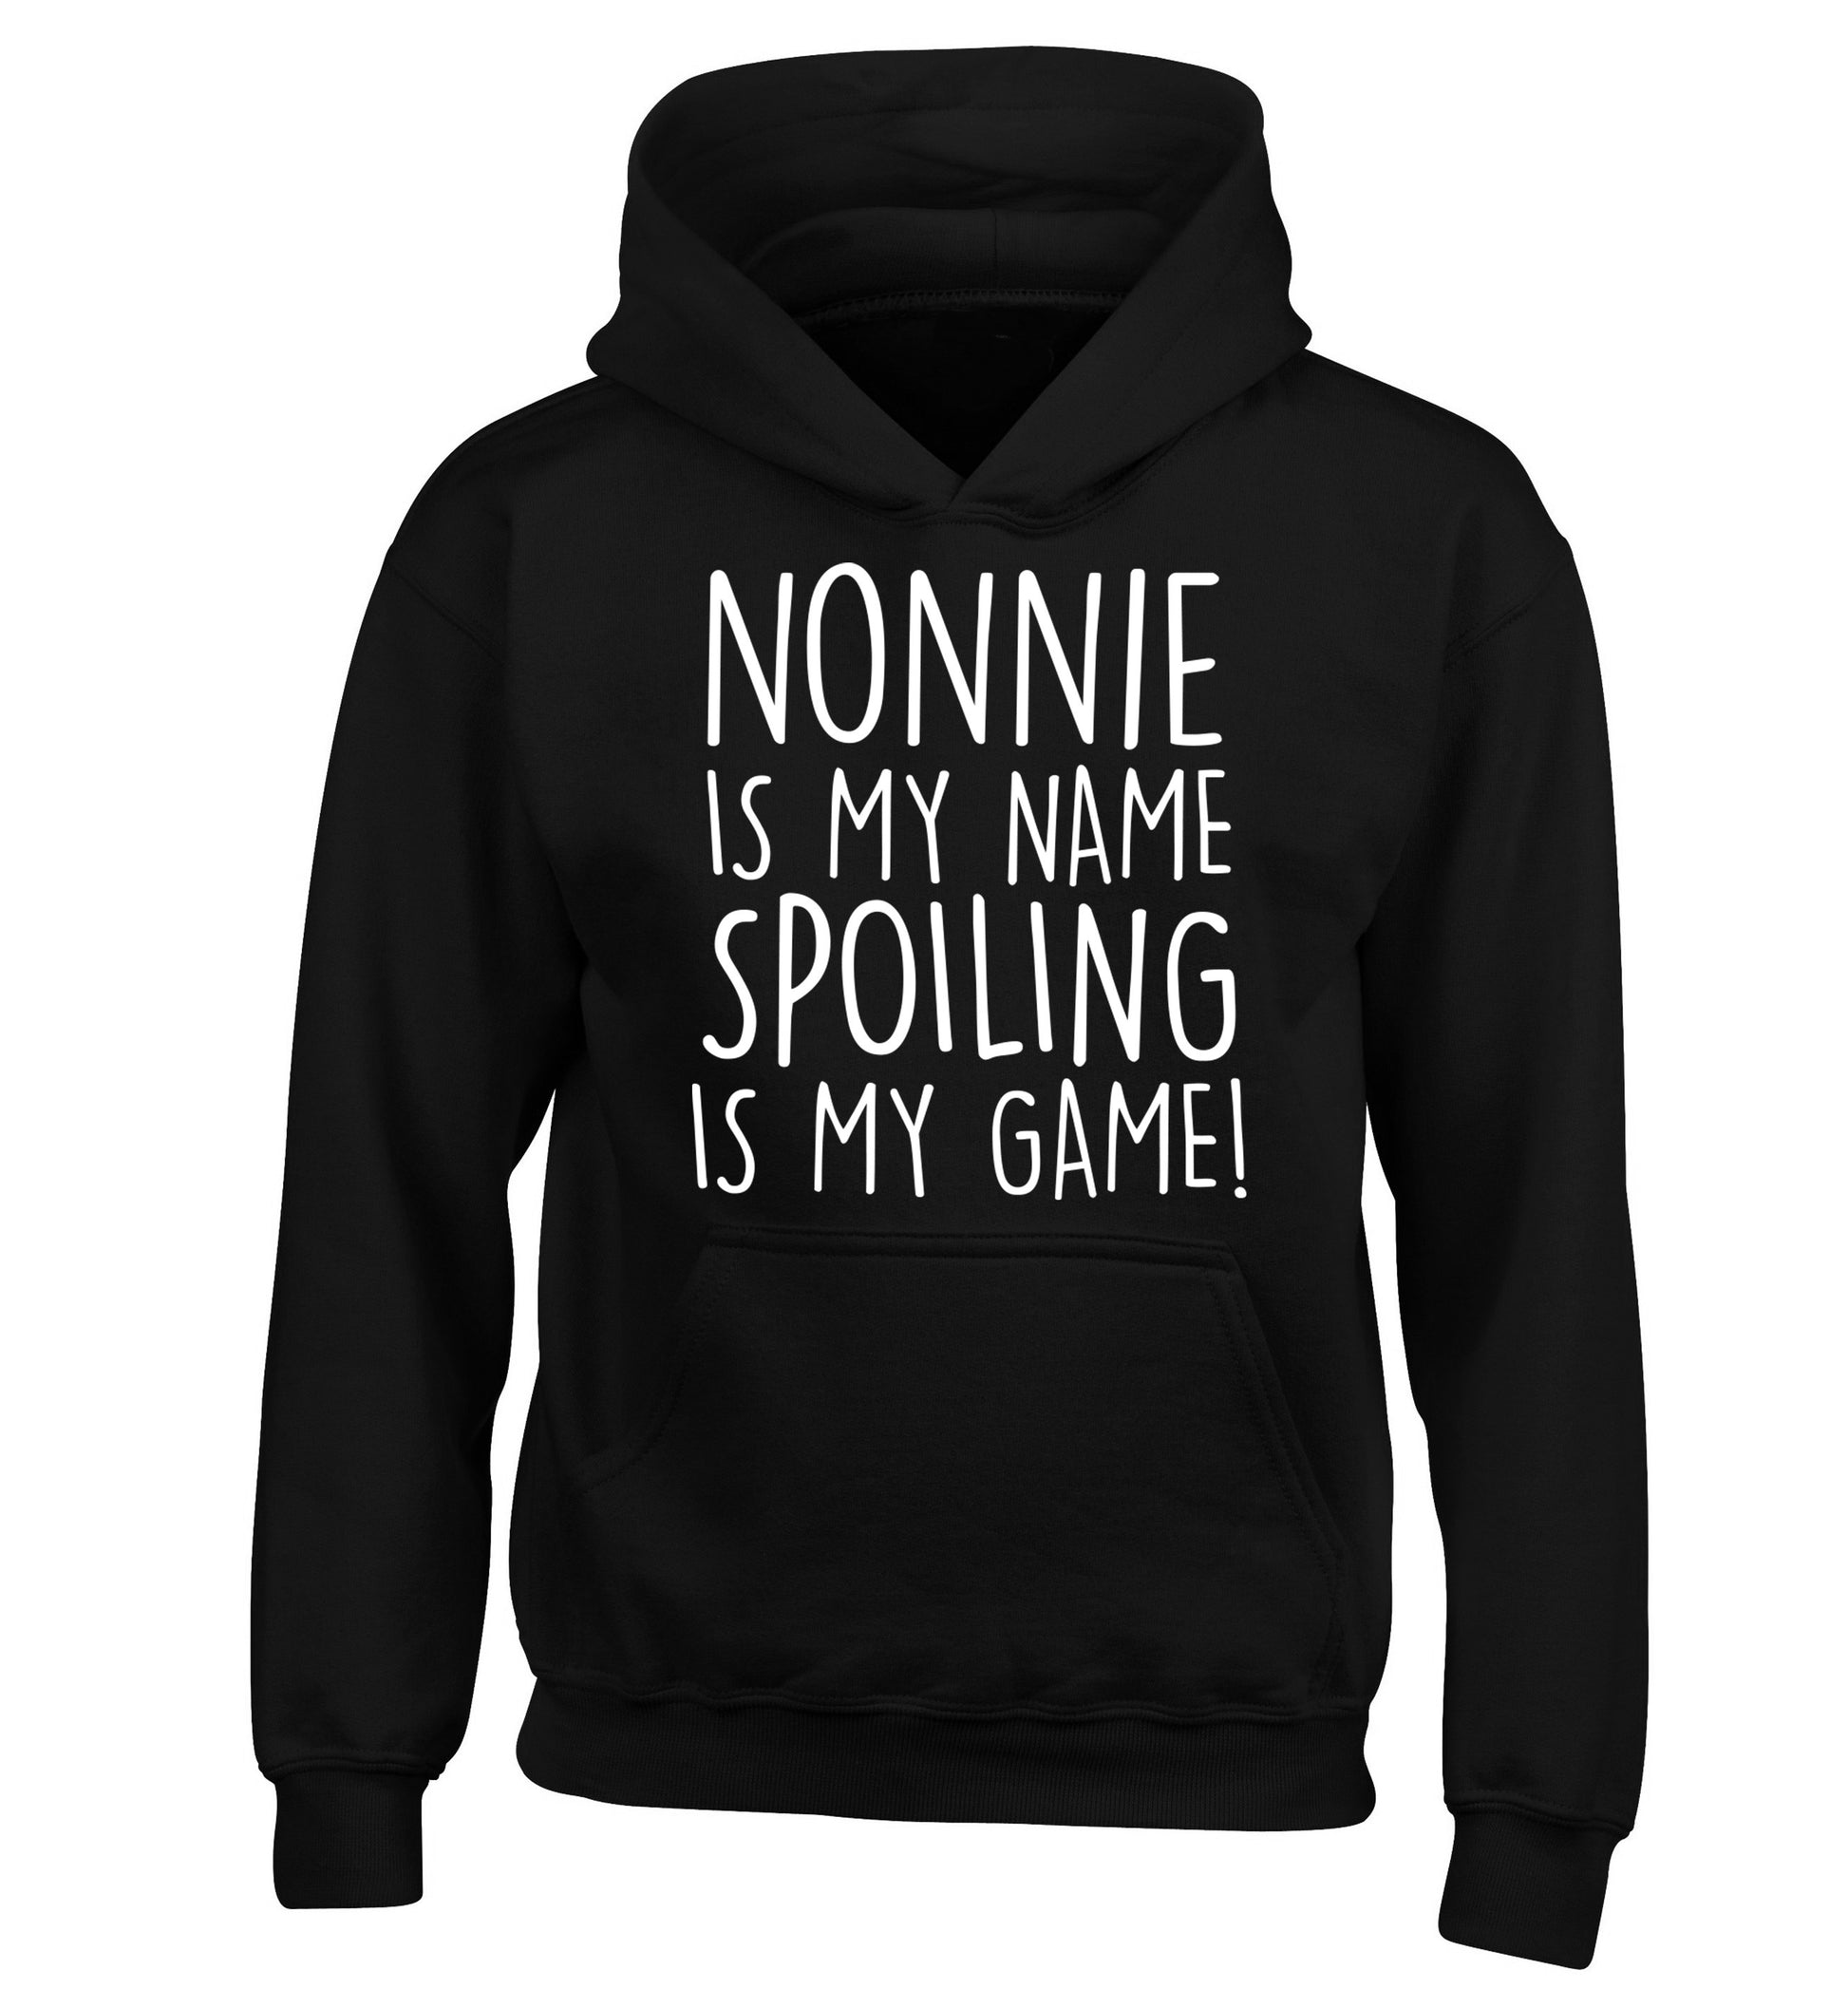 Nonnie is my name, spoiling is my game children's black hoodie 12-14 Years